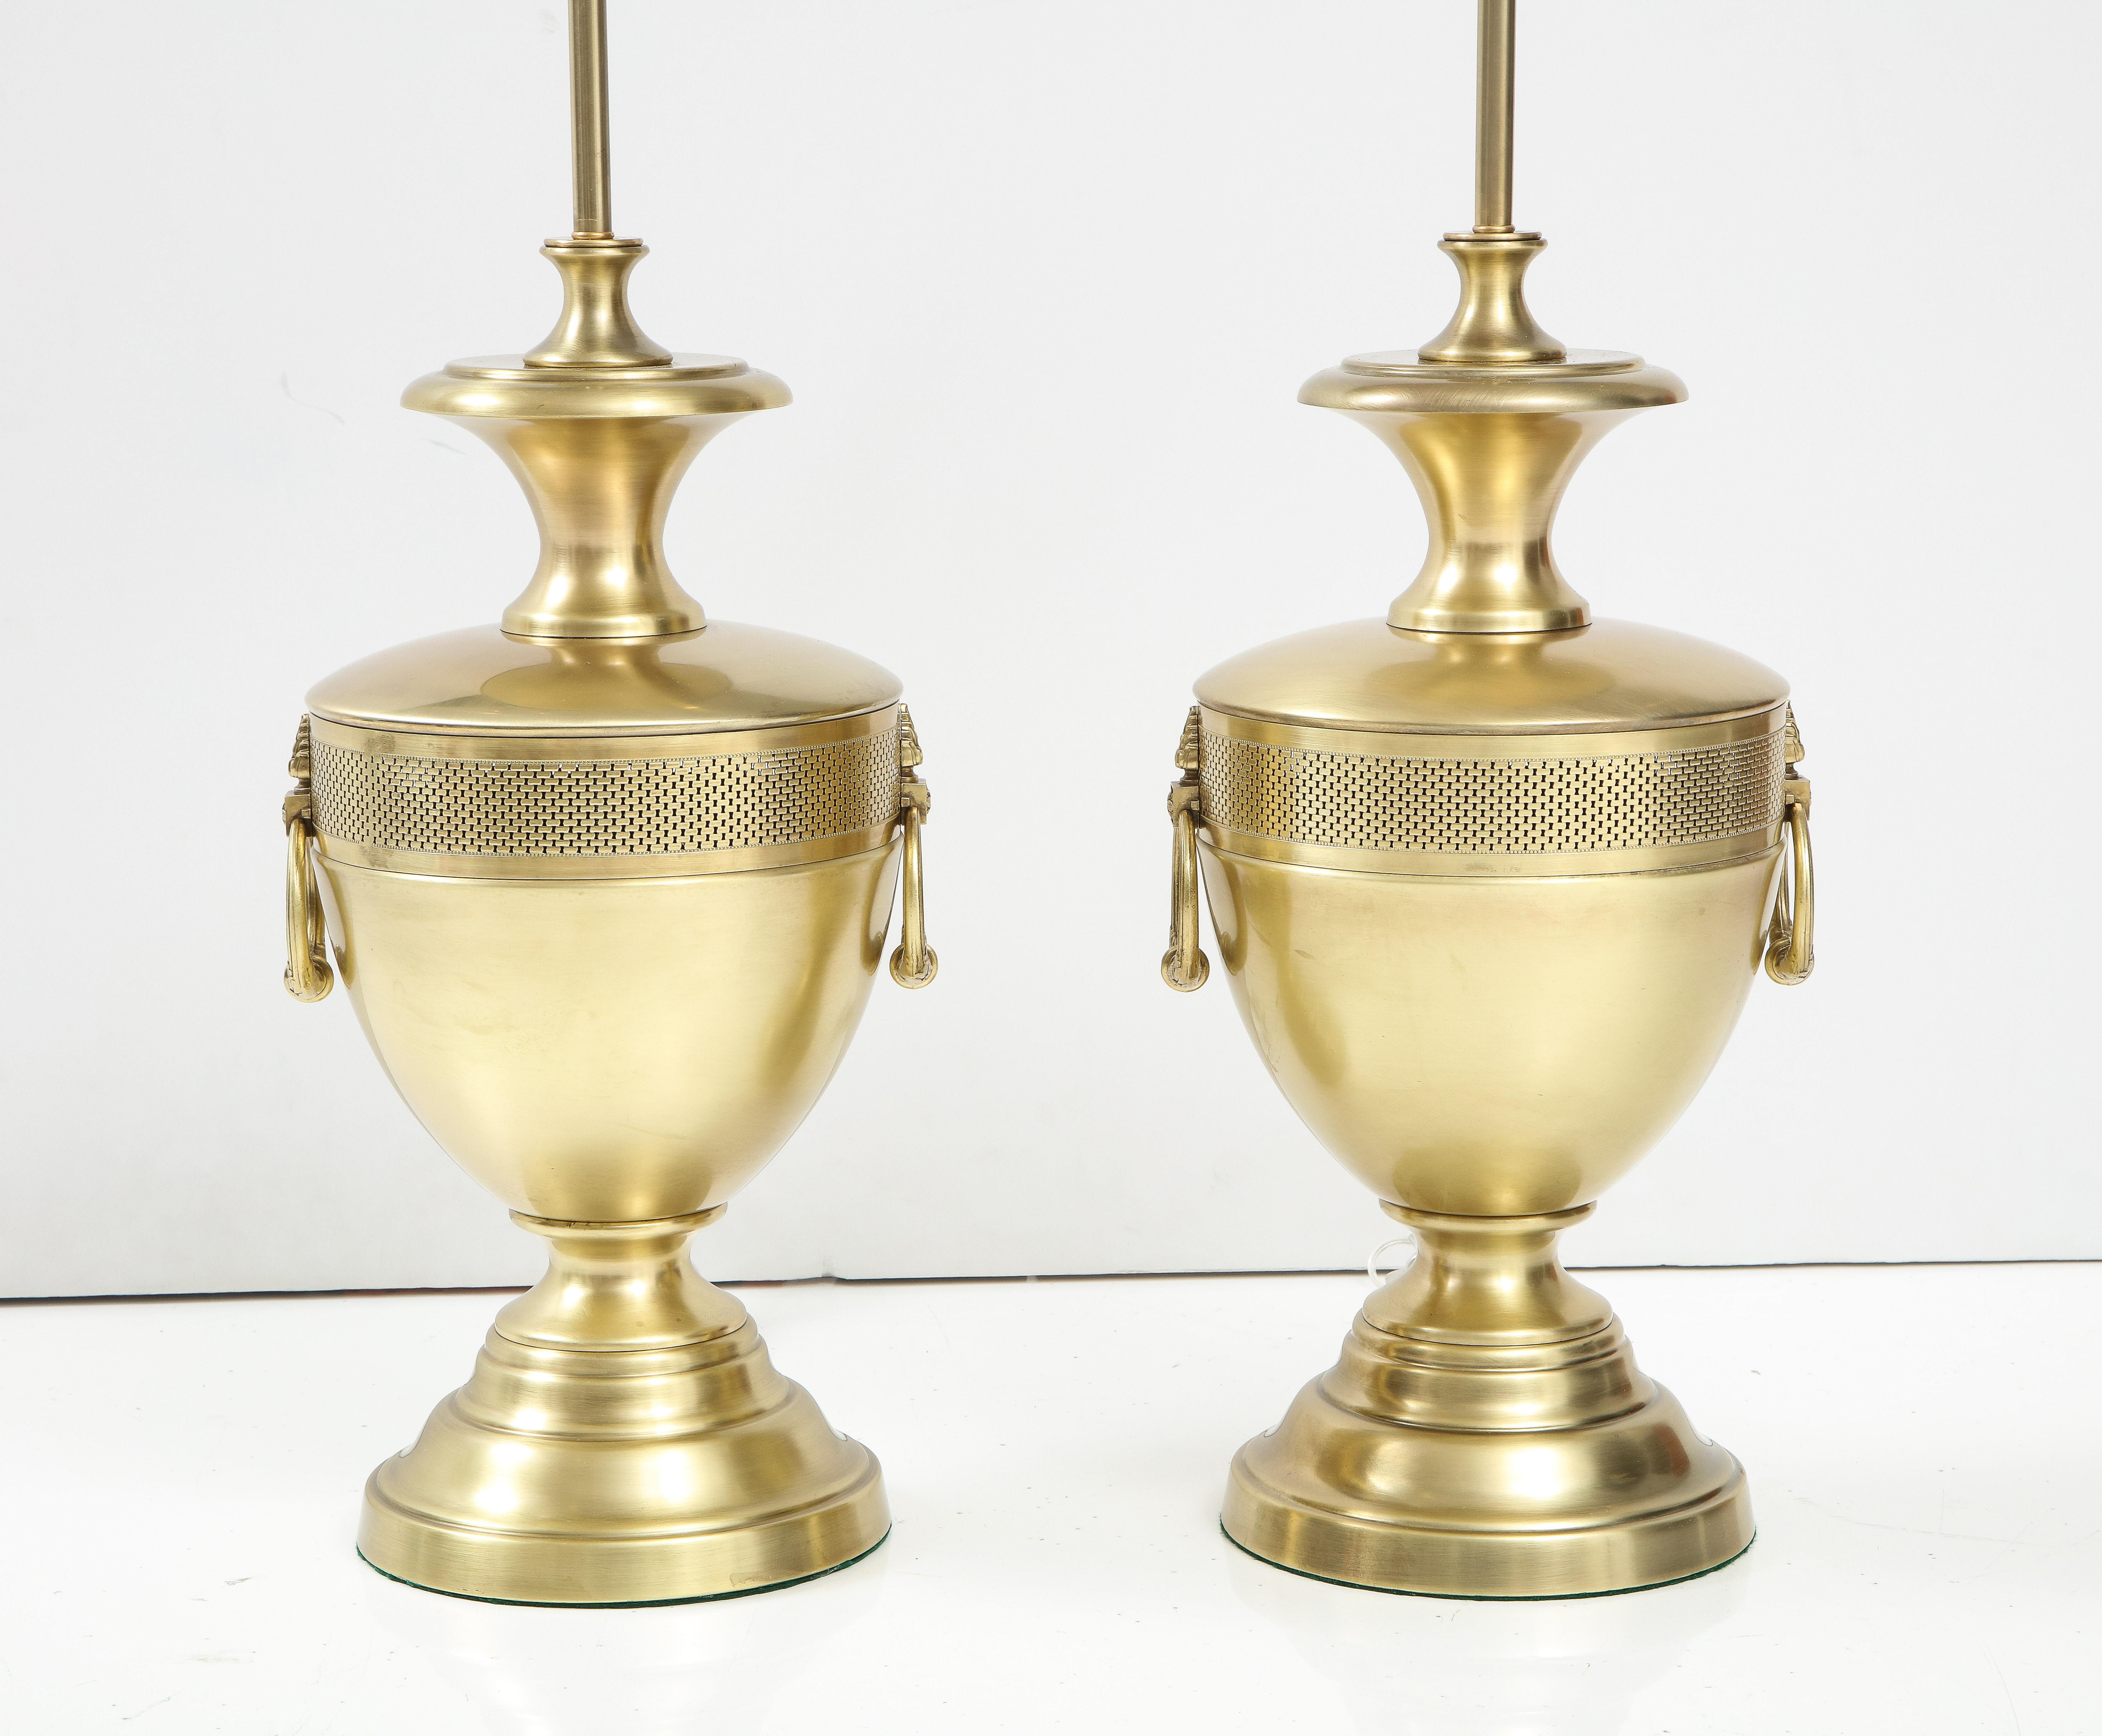 Stiffel Satin Brass Hollywood Regency Lamps In Excellent Condition For Sale In New York, NY